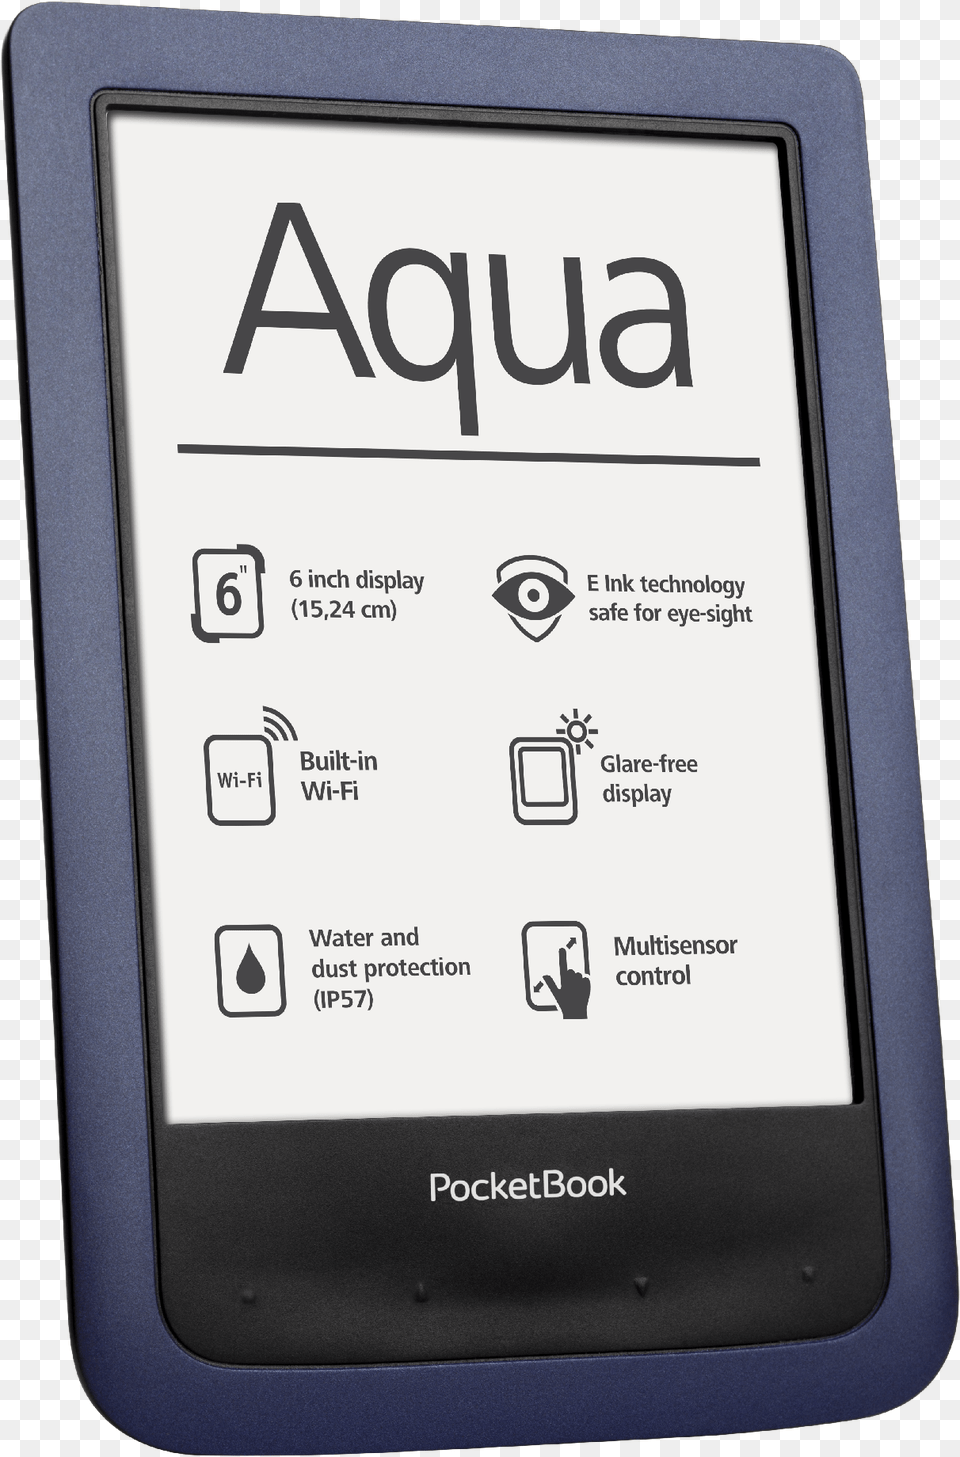 A Reliable Companion To Let You Read Anytime Anywhere Pocketbook Aqua, Computer, Electronics, Mobile Phone, Phone Png